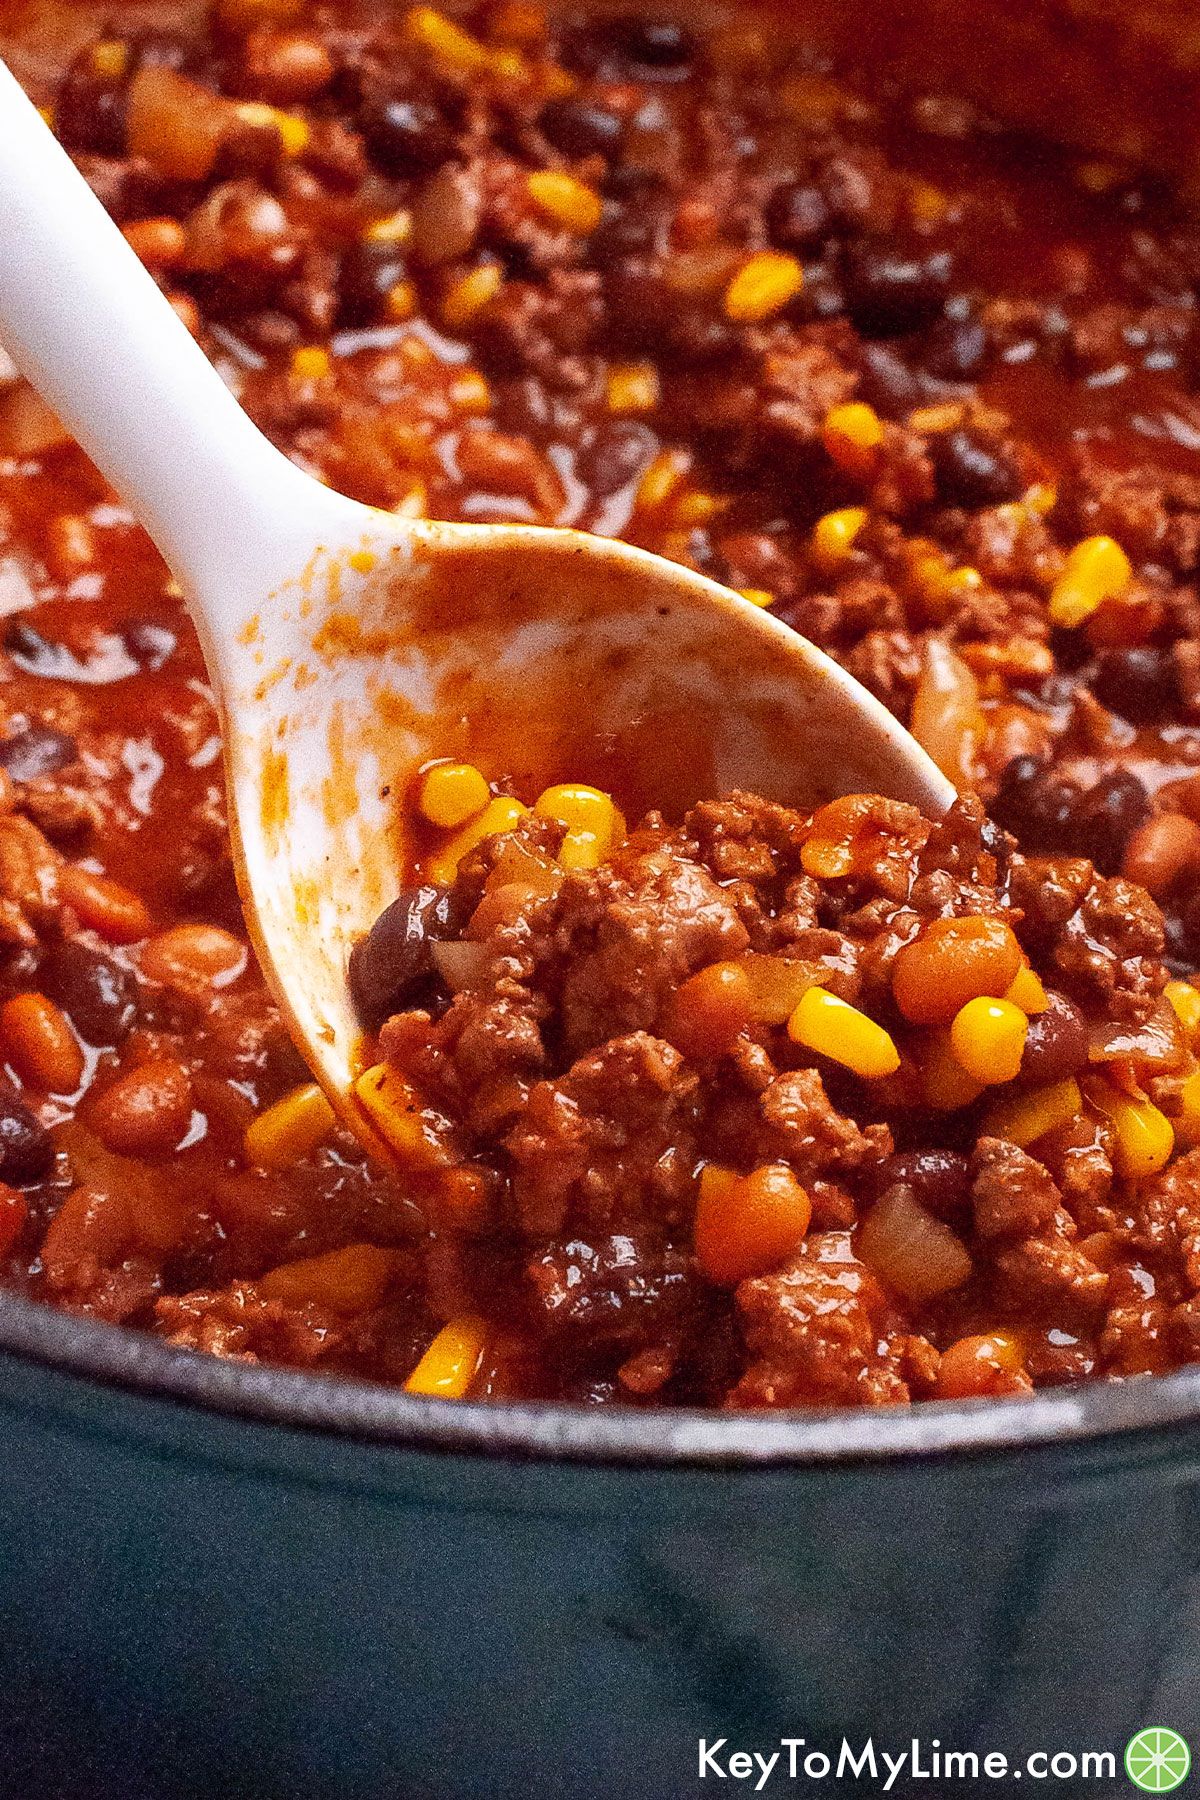 A white serving spoon scooping out a serving of sweet chili.